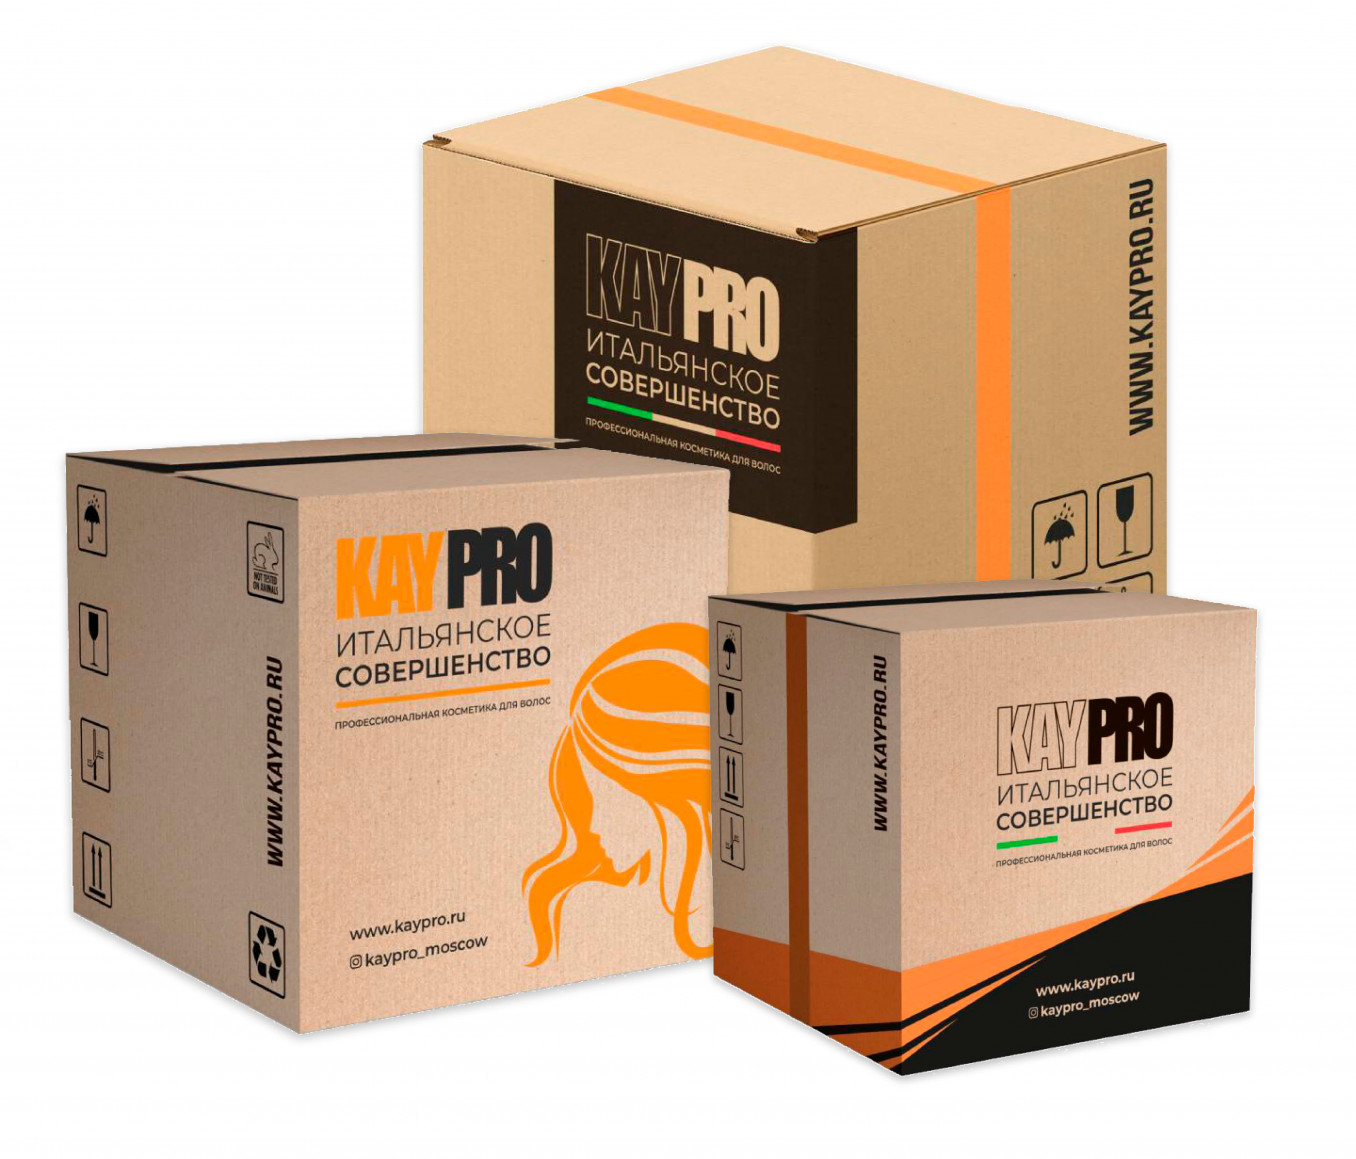 Design of logistics packaging for products of the Italian brand KAYPRO